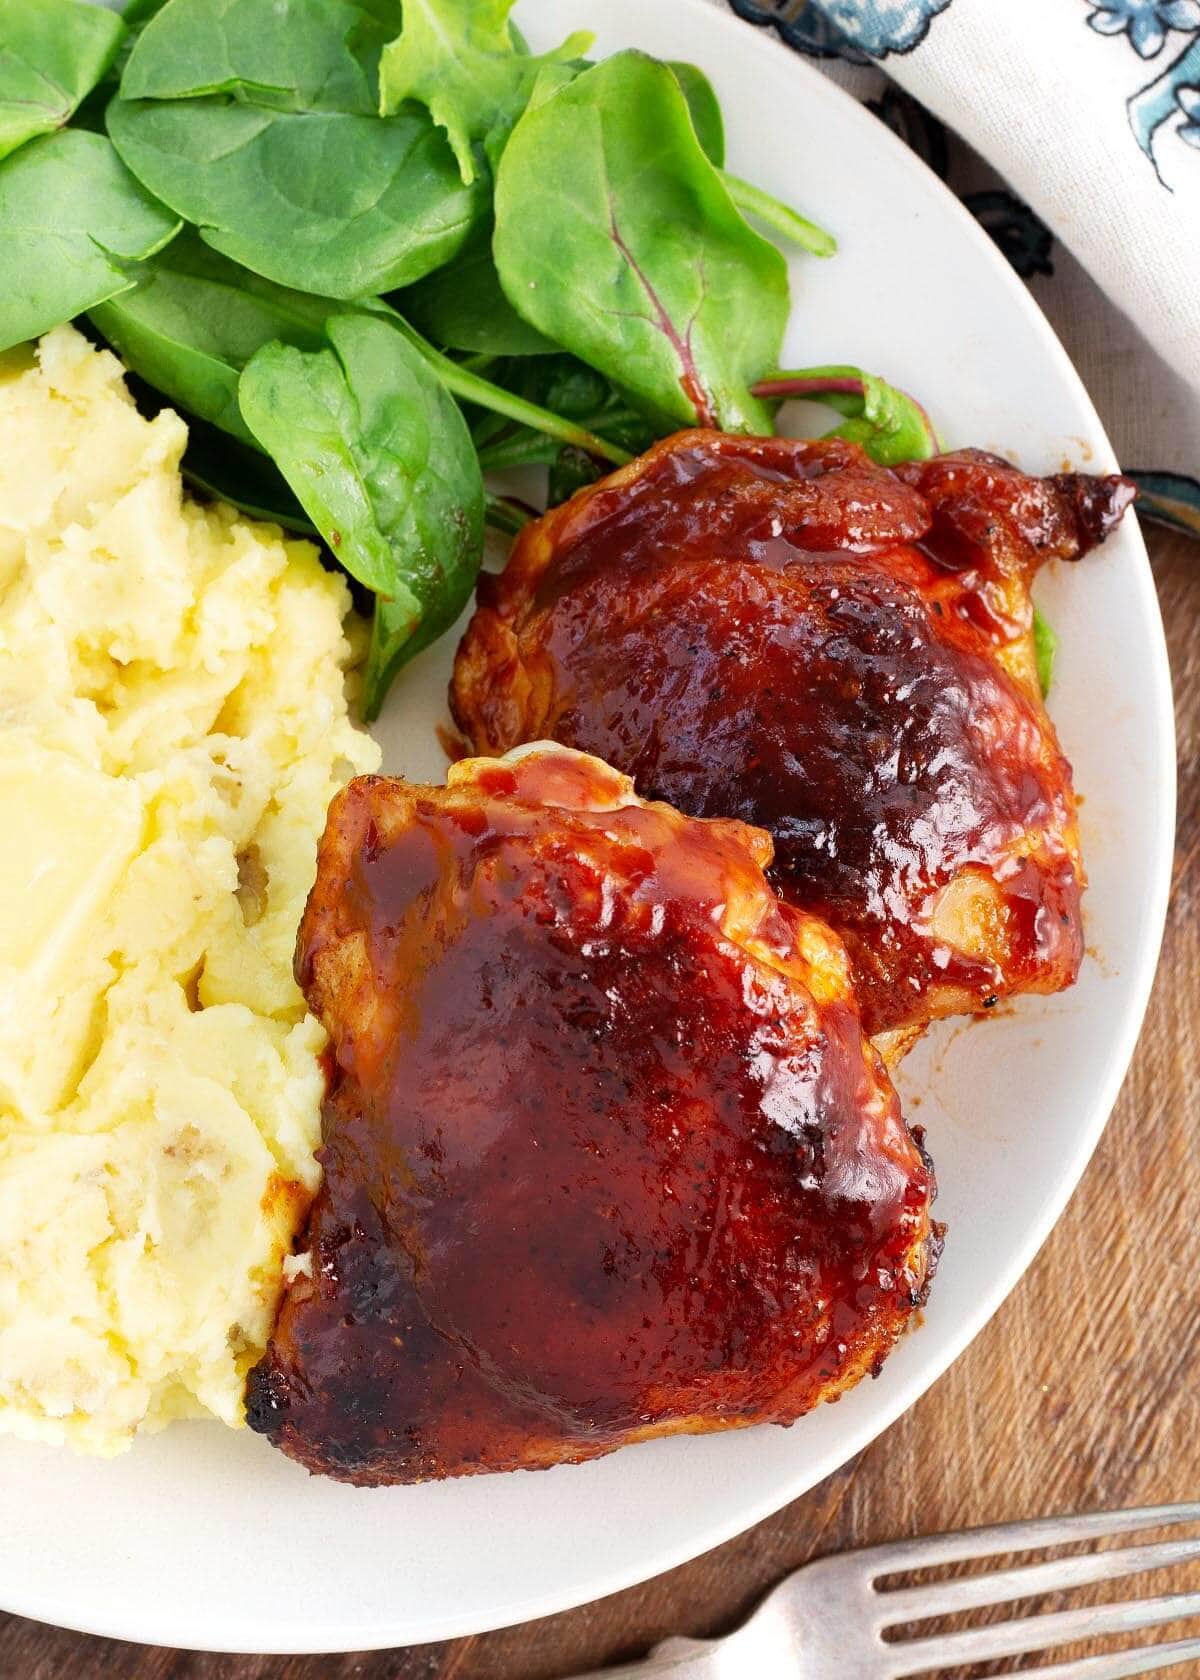 baked bbq chicken thighs on a white plate with side dishes